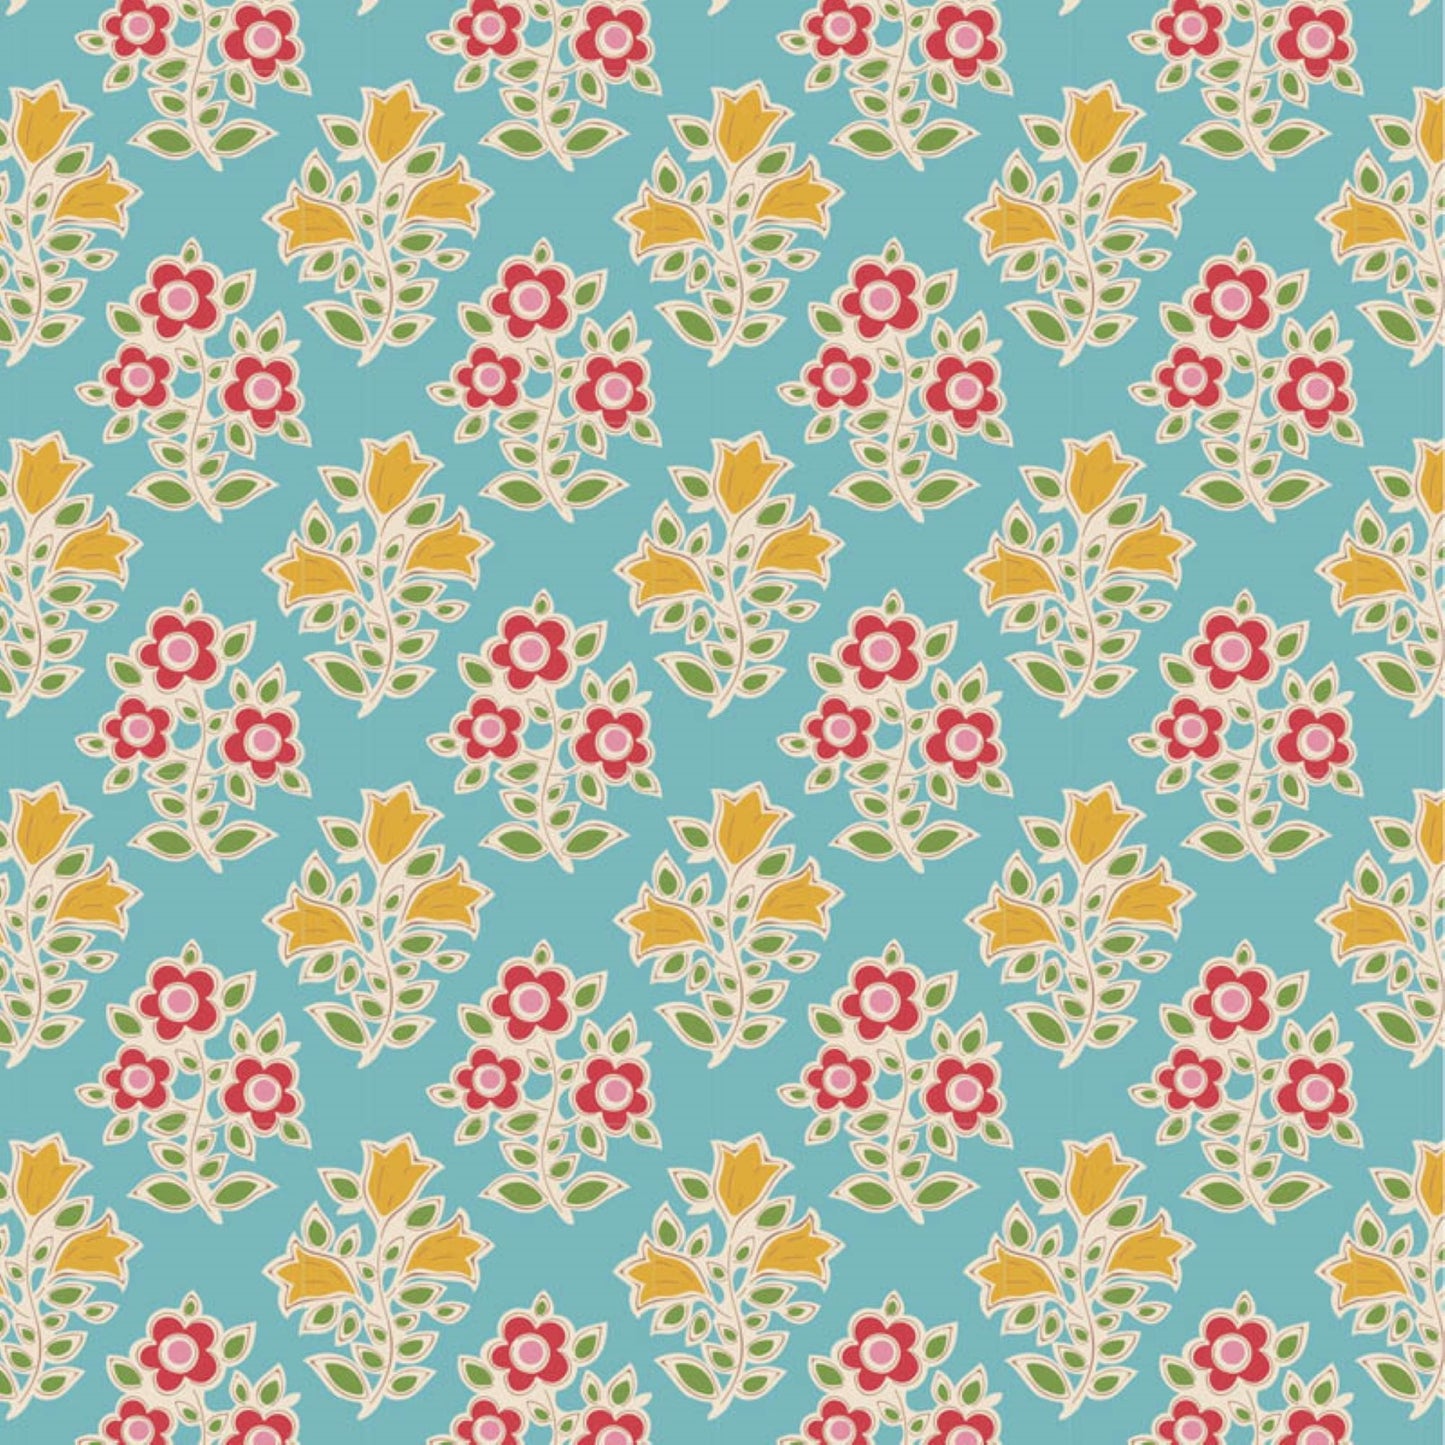 Tilda Jubilee and Farm Flowers floral cream teal bundle 7 Fat 16's cotton quilt fabric